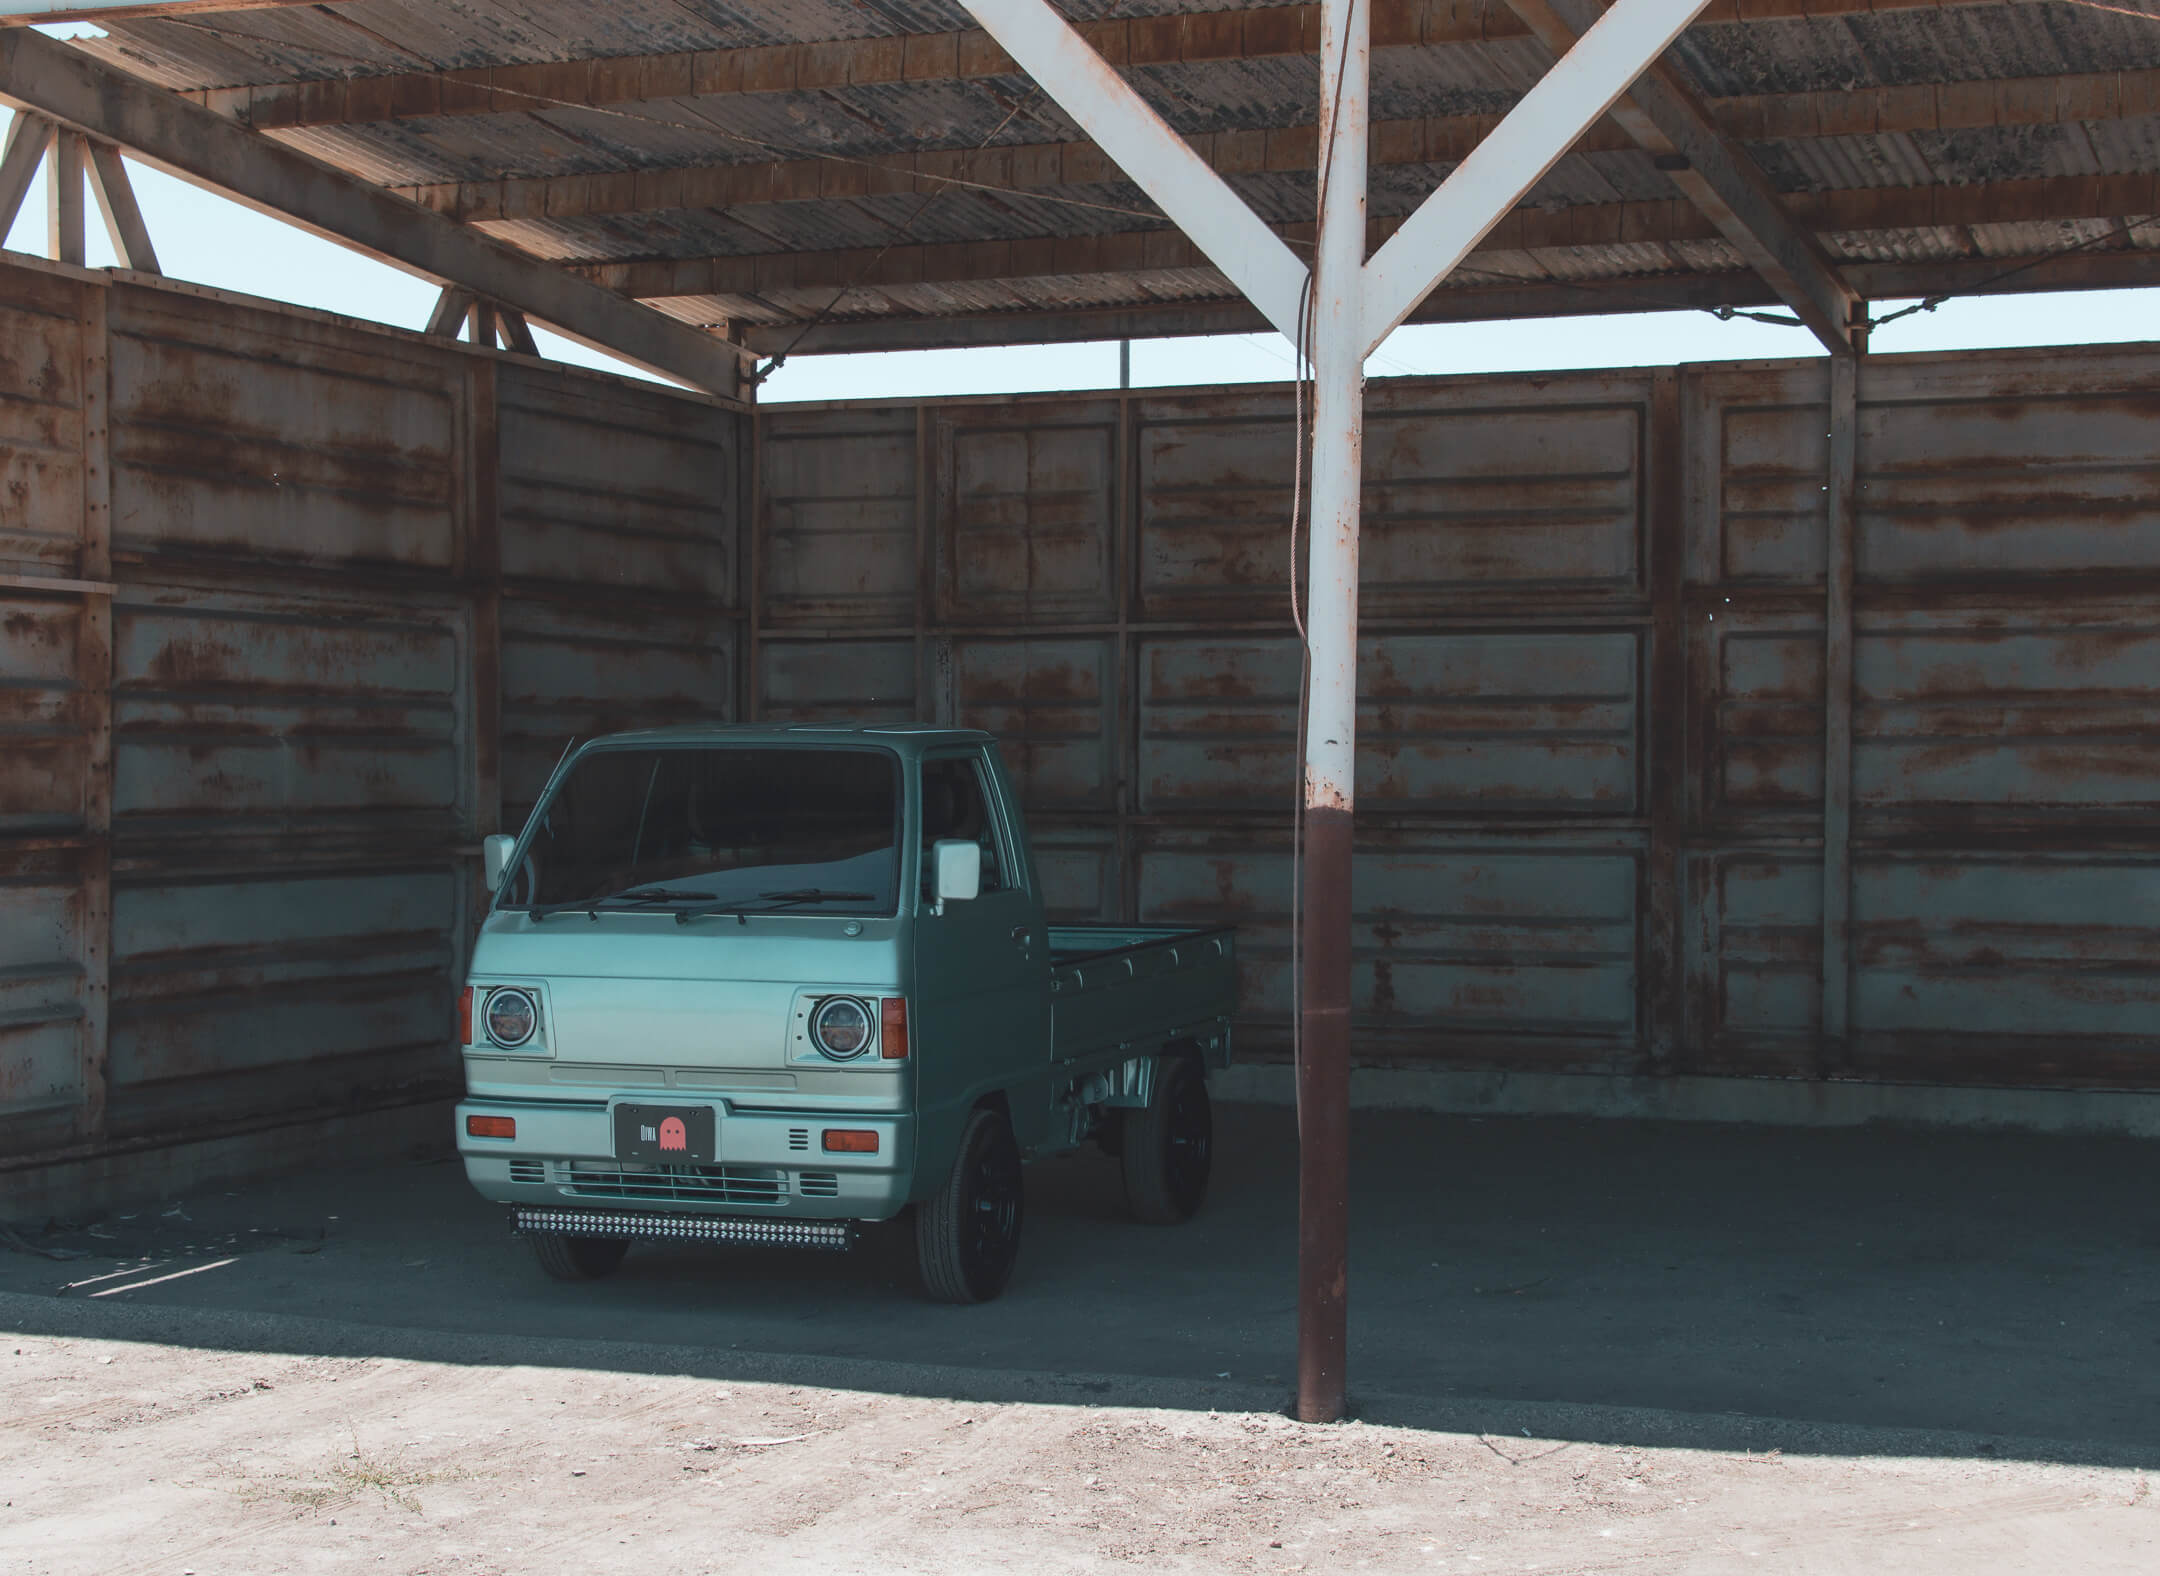 Green Kei Truck Parked Inside a Rustic Wooden Shelter in Montana